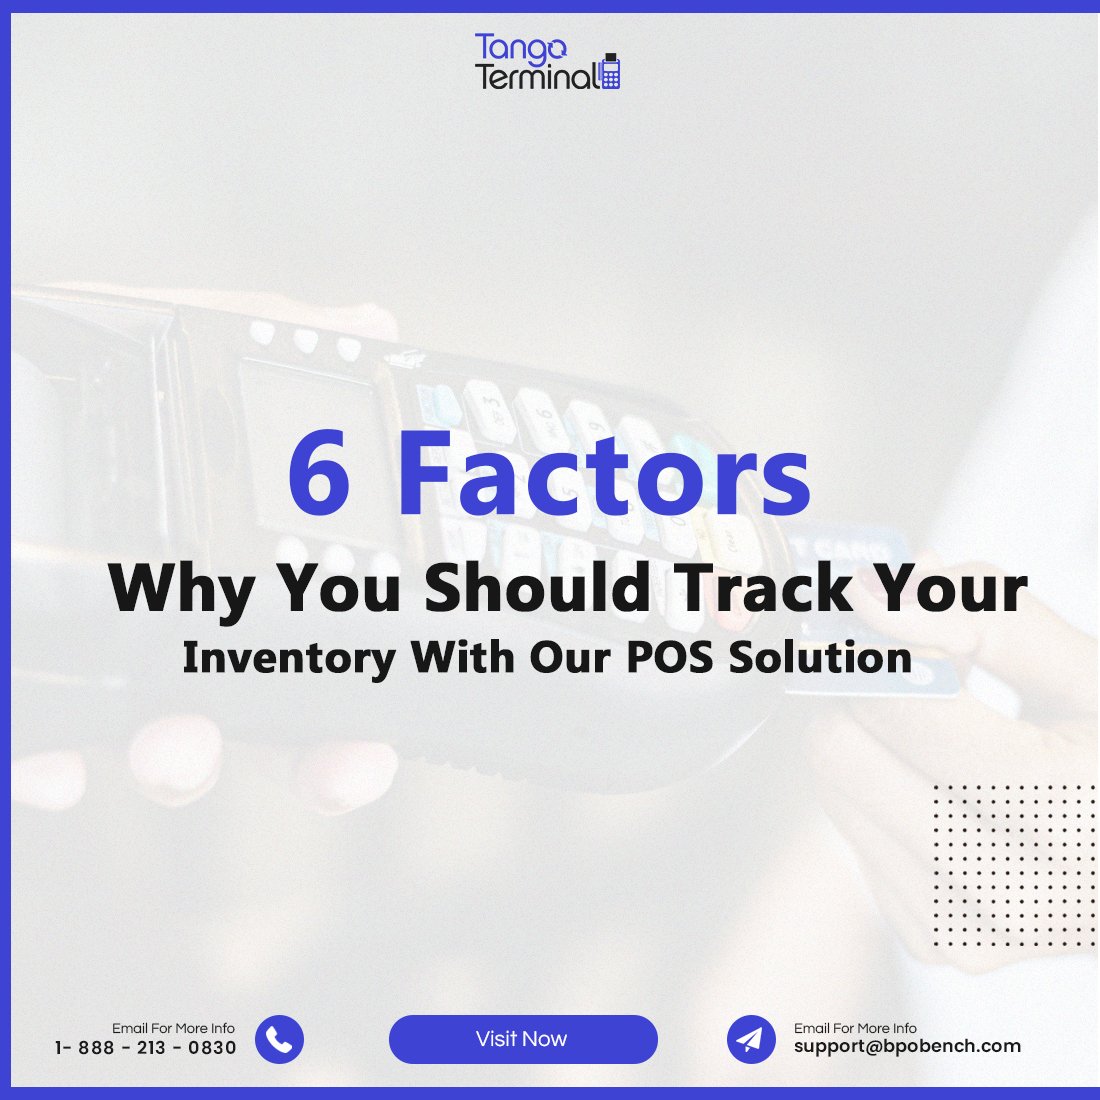 Maximize efficiency and stay ahead with these 6 factors for effective inventory management.

Read more: instagram.com/p/C5QXQYitt6R/…

#tangoterminal #pos #retailbusiness #automatingtasks #efficiency #inventorymanagement